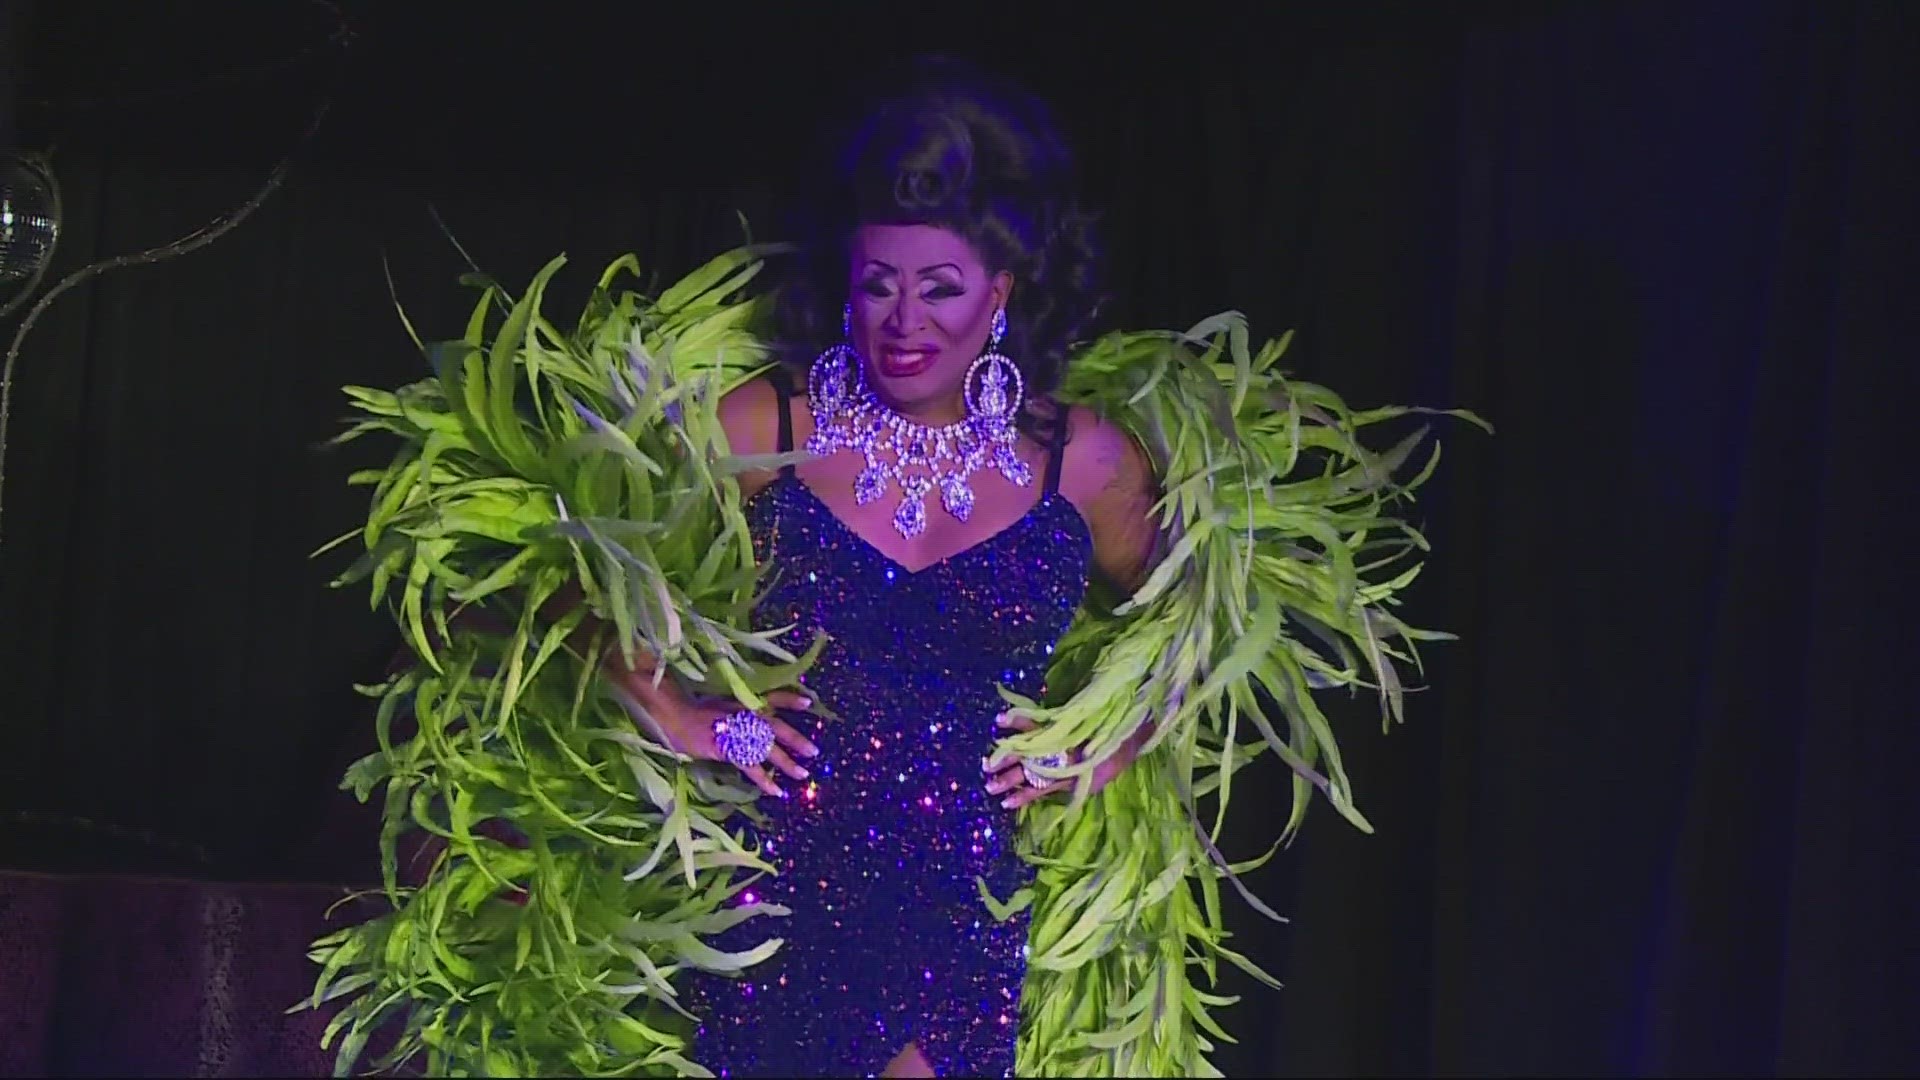 Organizers said Drag-a-thon pushes back against bans on drag shows happening around the U.S.